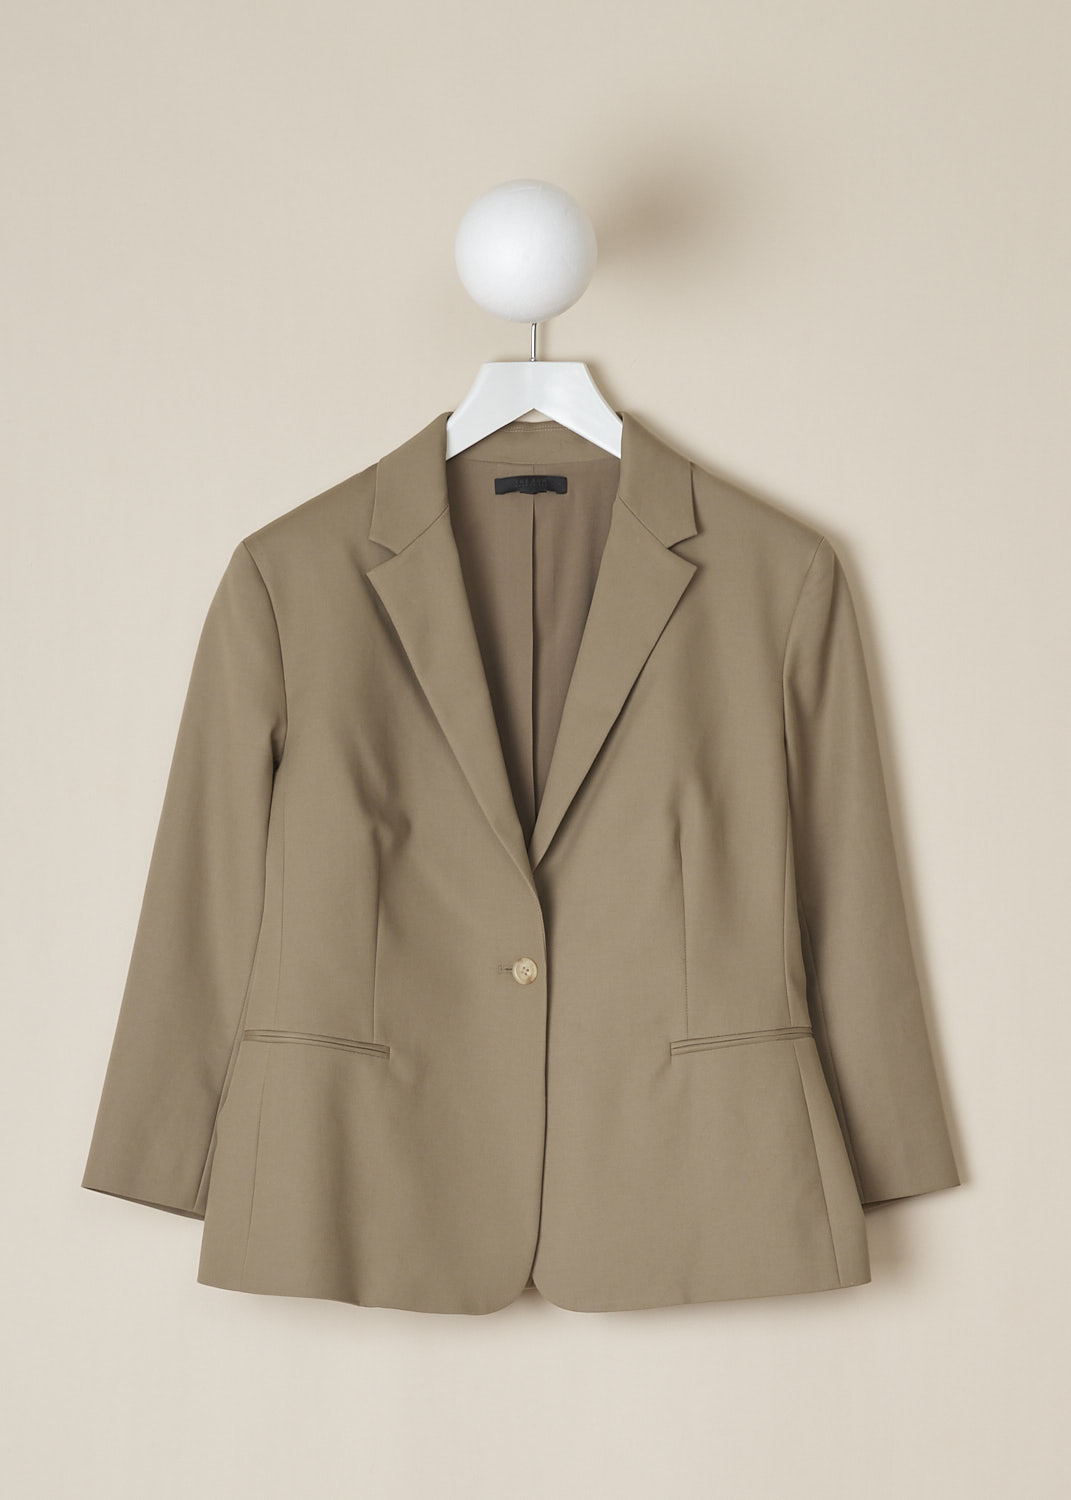 THE ROW, REMY JACKET IN SEPIA, REMY_JACKET_1113W580_SEPIA, Beige, Brown, Front, This cropped Sepia colored jacket has a notched lapel and a front button closure. The jacket has three-quarter sleeves. In the front, the jacket has welt pockets. 


